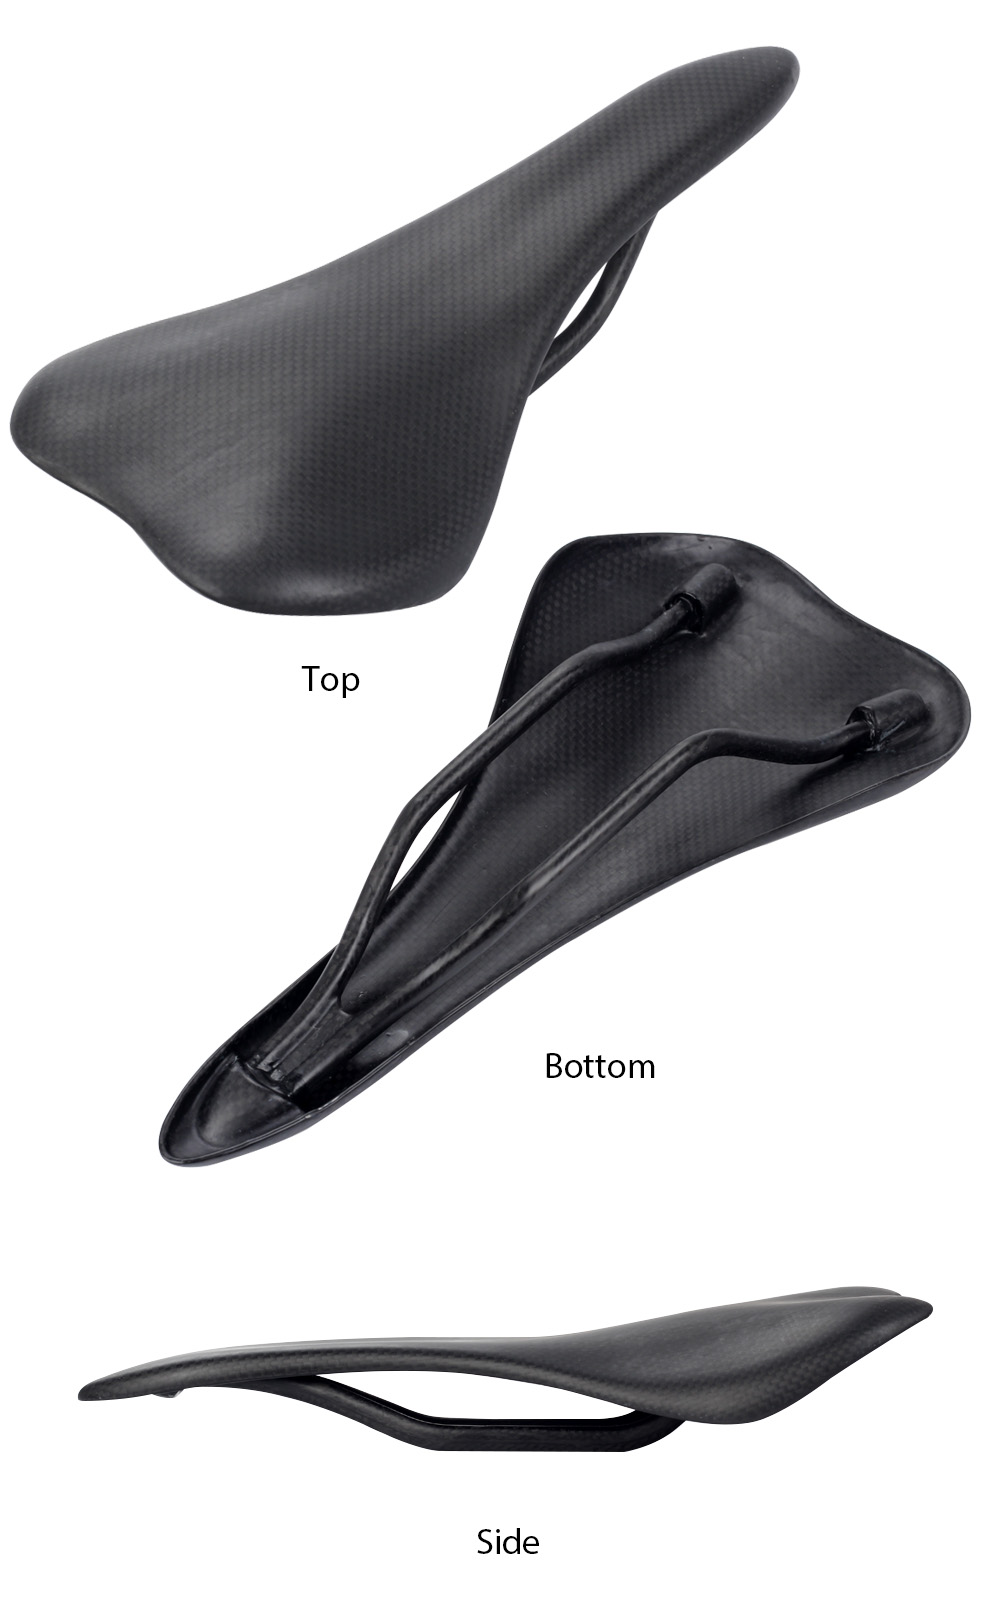 Carbon Fiber Mountain Road Bike Seat Saddle Bow Cushion Bicycle Accessories